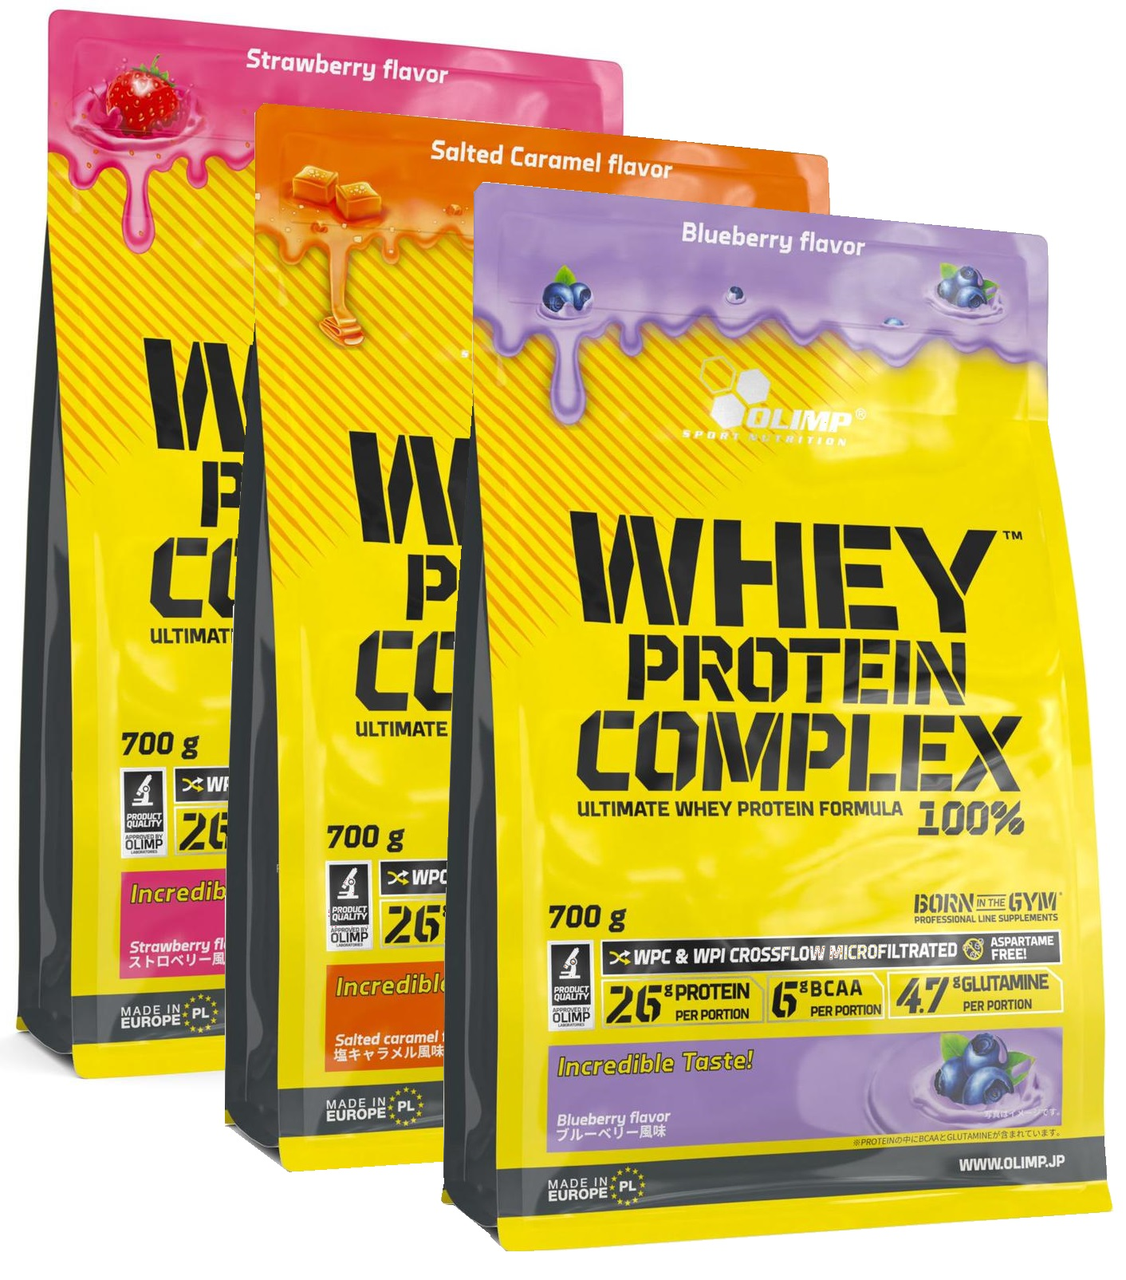 Протеин Whey Protein Complex 100%, 700 g, Olimp Nutrition Peanut butter - фото 1 - id-p106027132